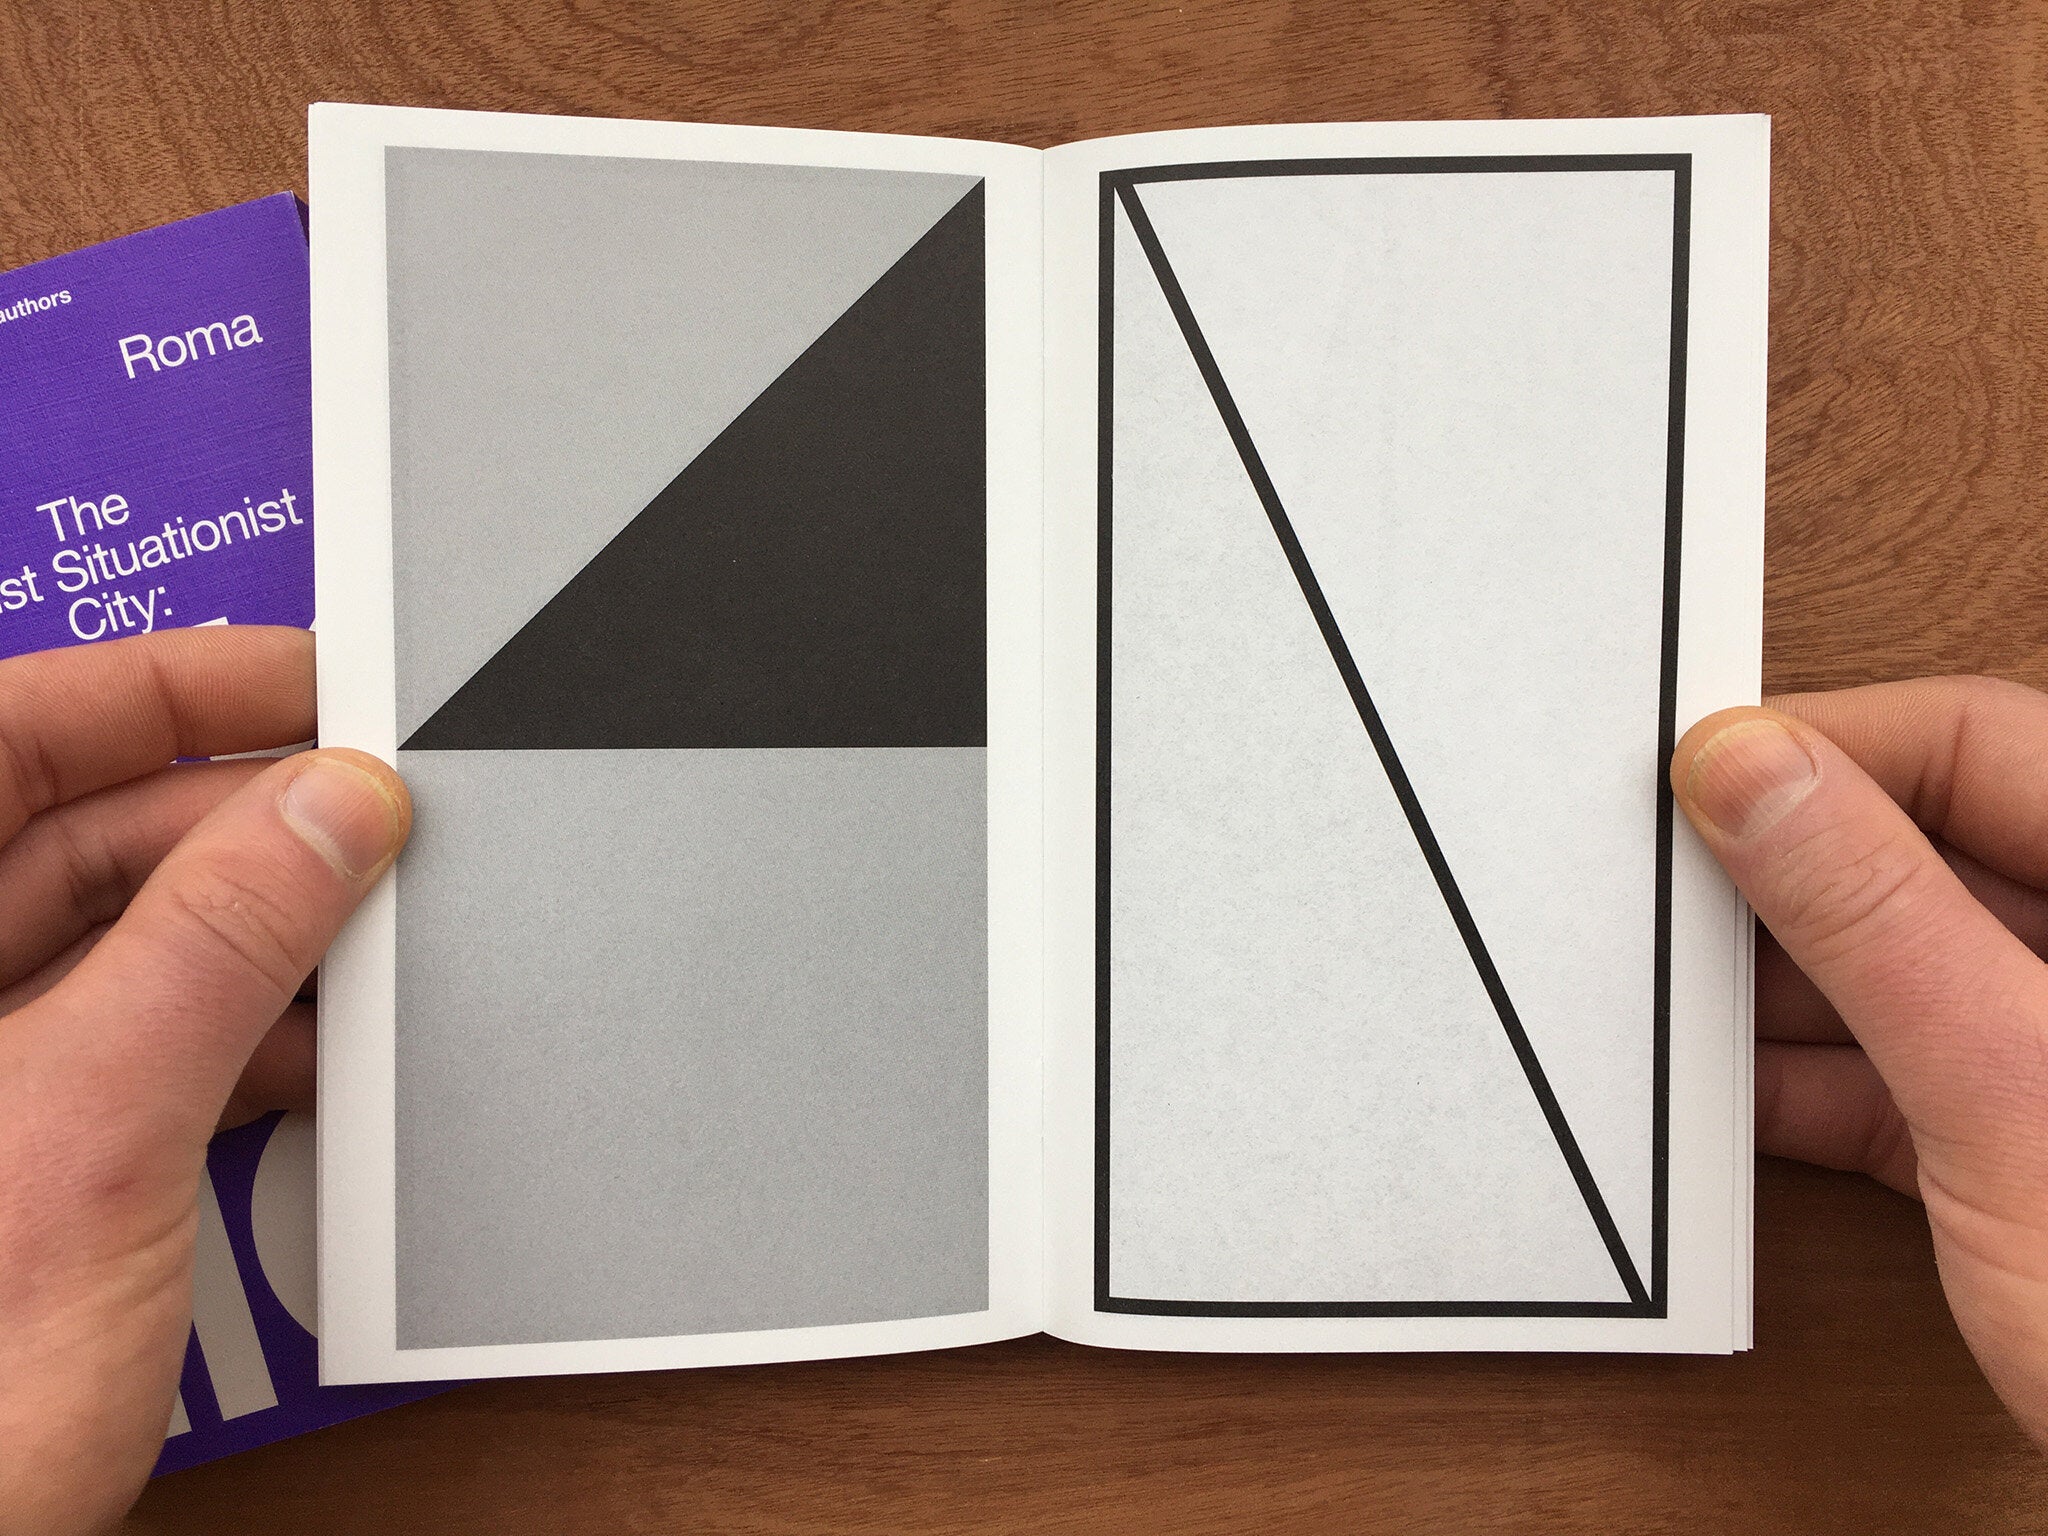 SUPERSTRUCTURES (NOTES ON EXPERIMENTAL JETSET / VOLUME 2) by Experimental Jetset